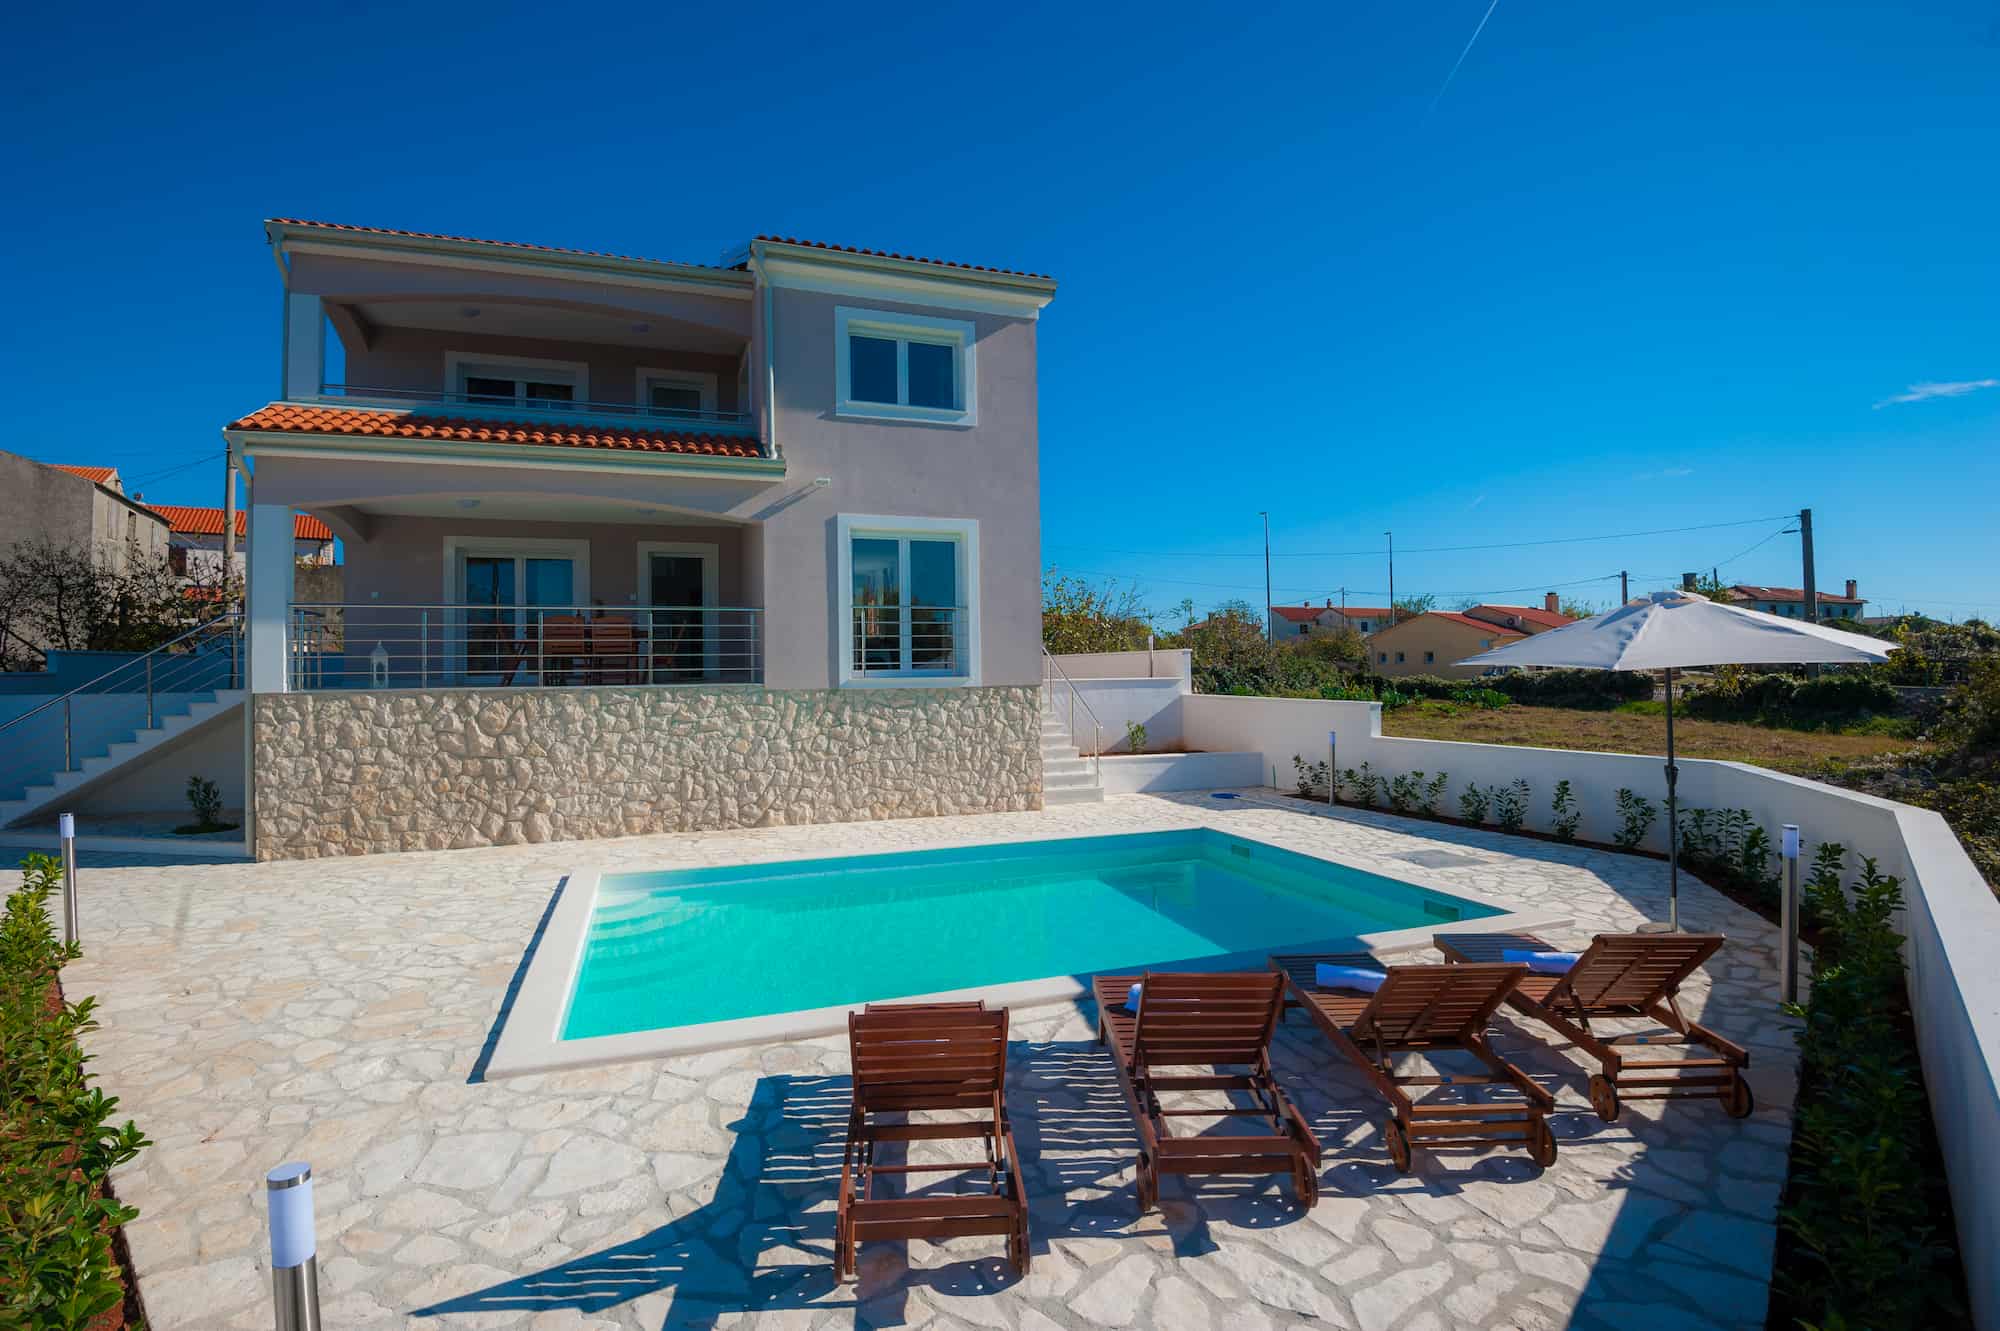 Villa with pool and sea view, in a small village